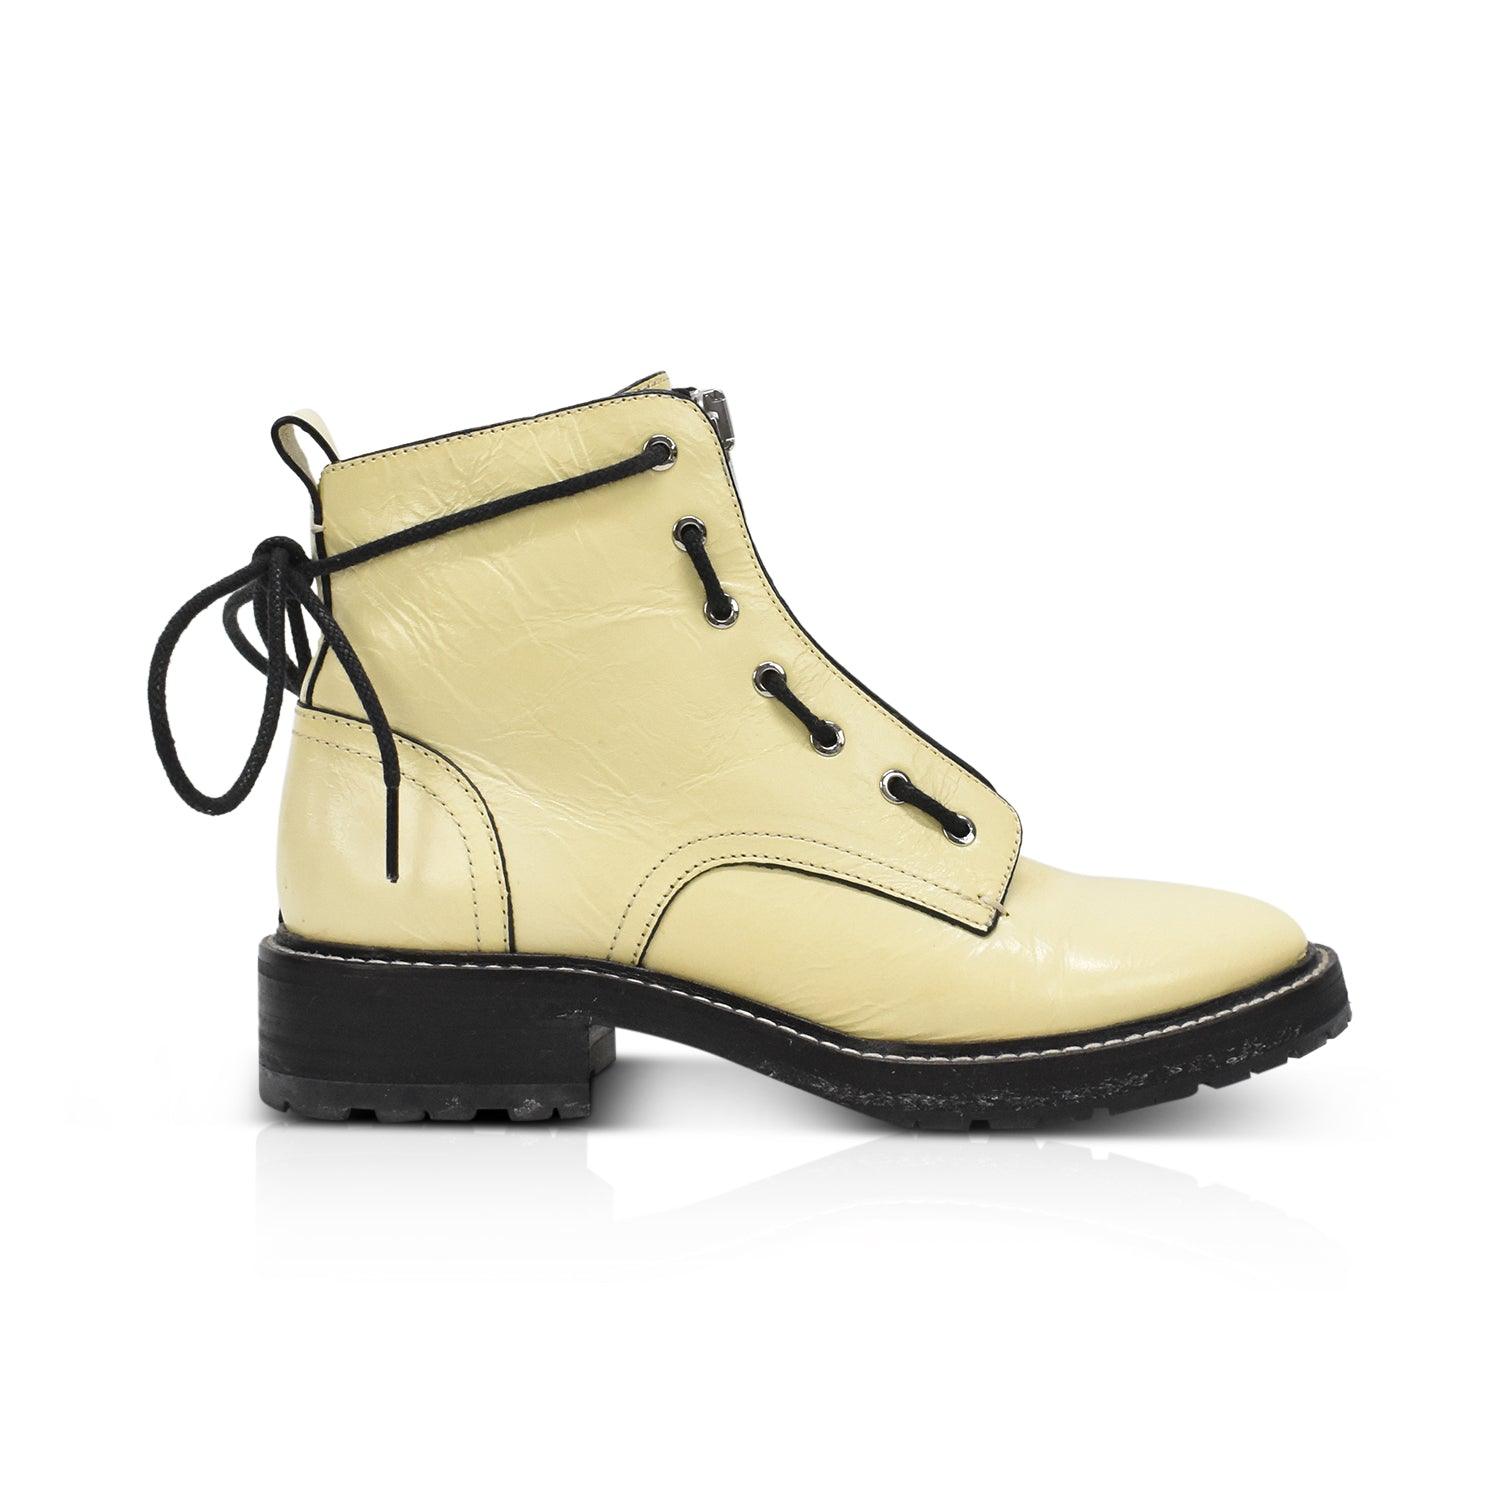 Rag & Bone 'Cannon' Boots - Women's 35 - Fashionably Yours